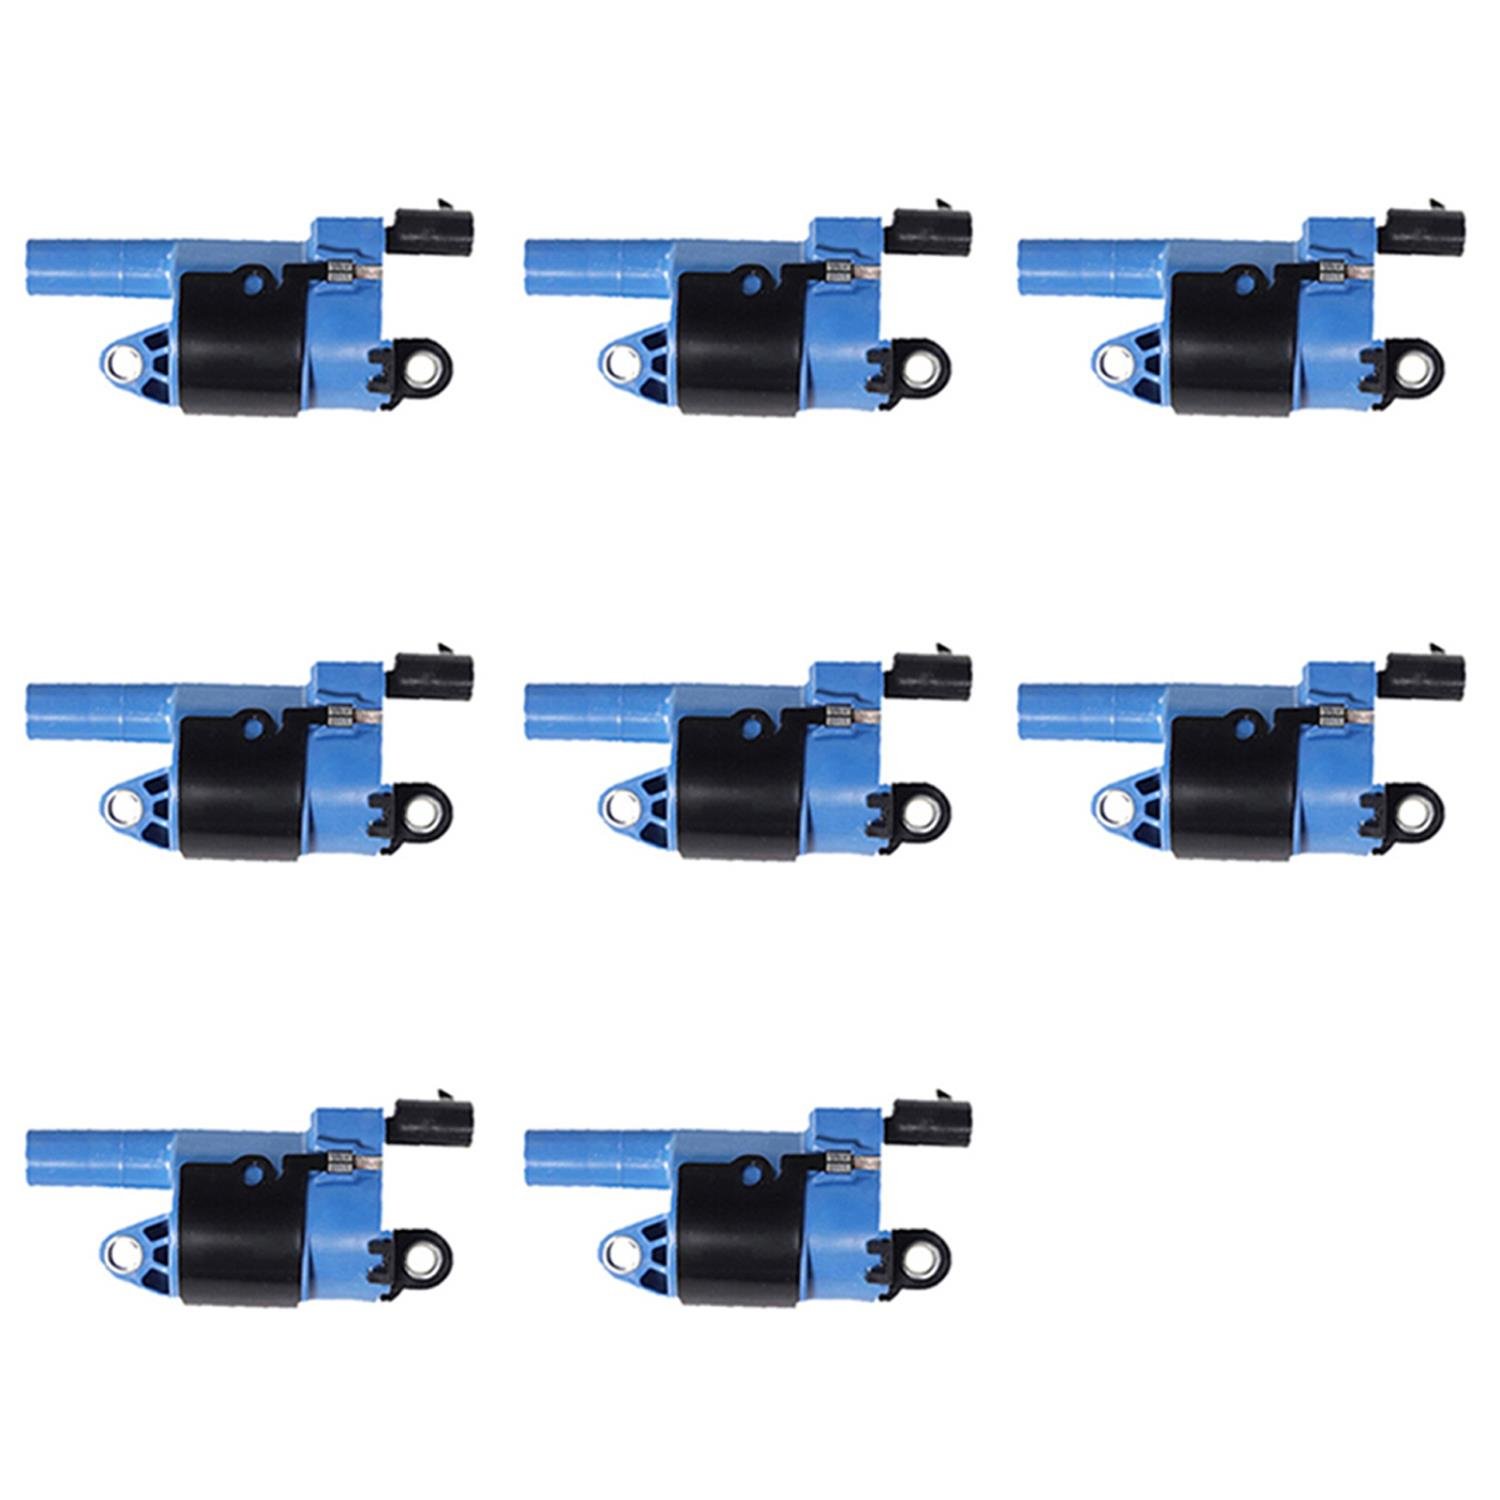 High-Performance Ignition Coils for GM 6.0L/5.3L [Blue]